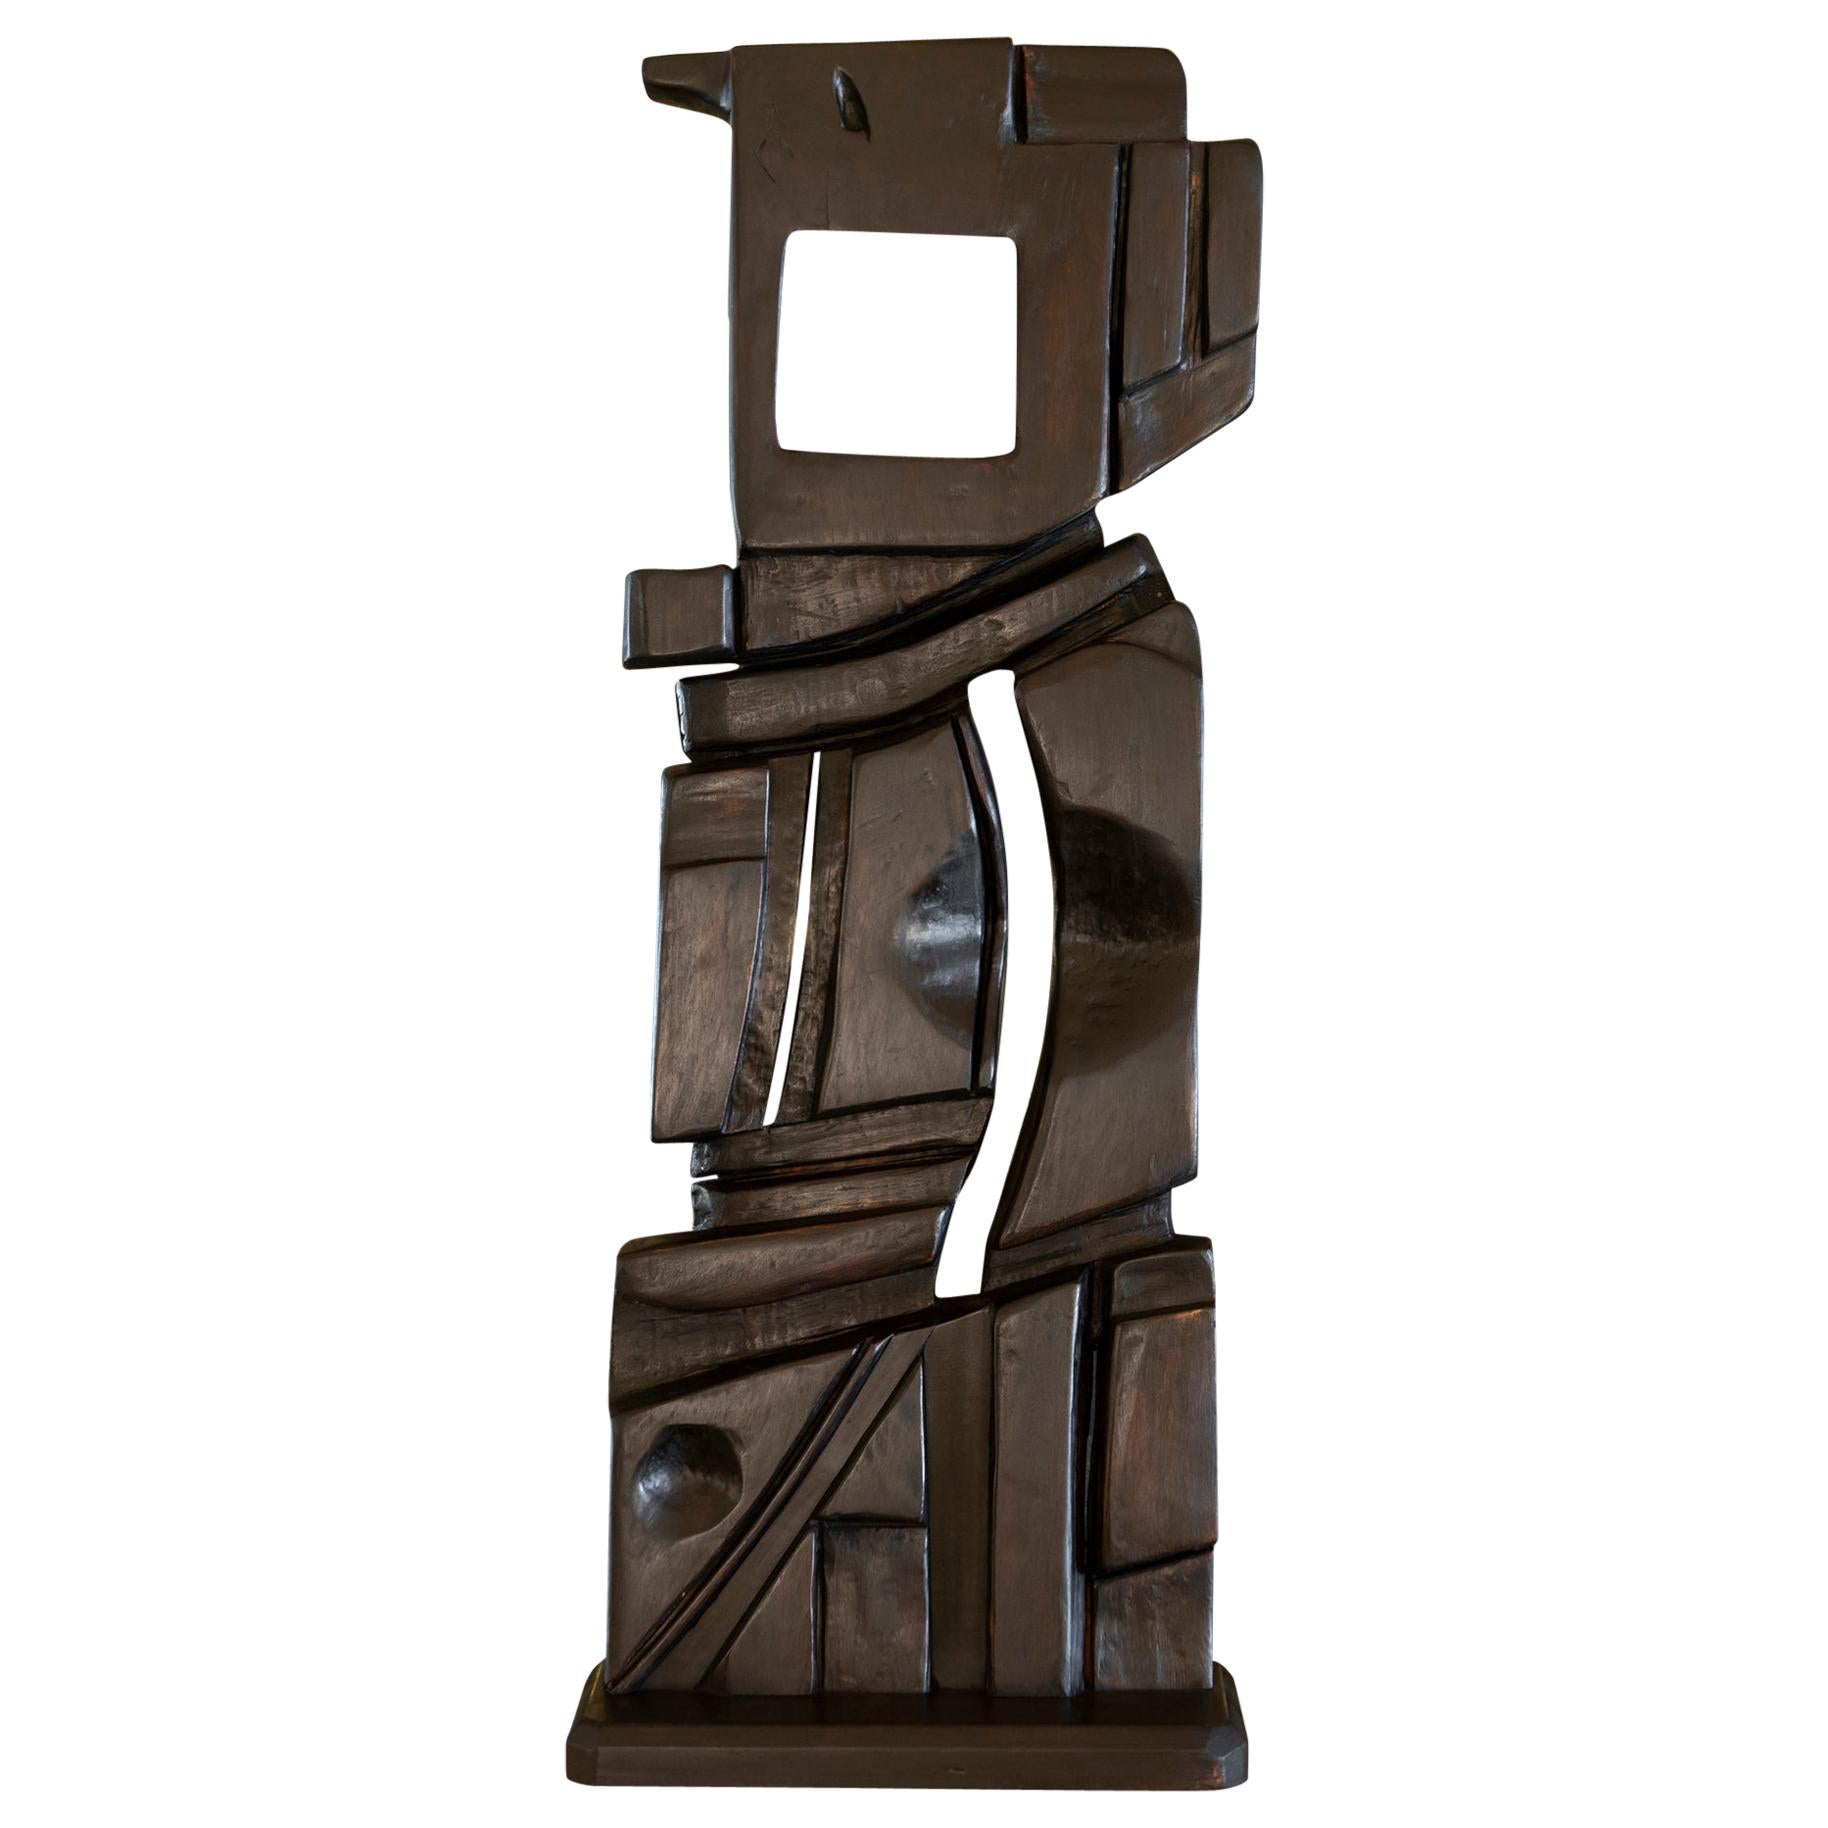 French Abstract Modernist Carved Wood Sculpture, circa 1960s, Artist Unknown